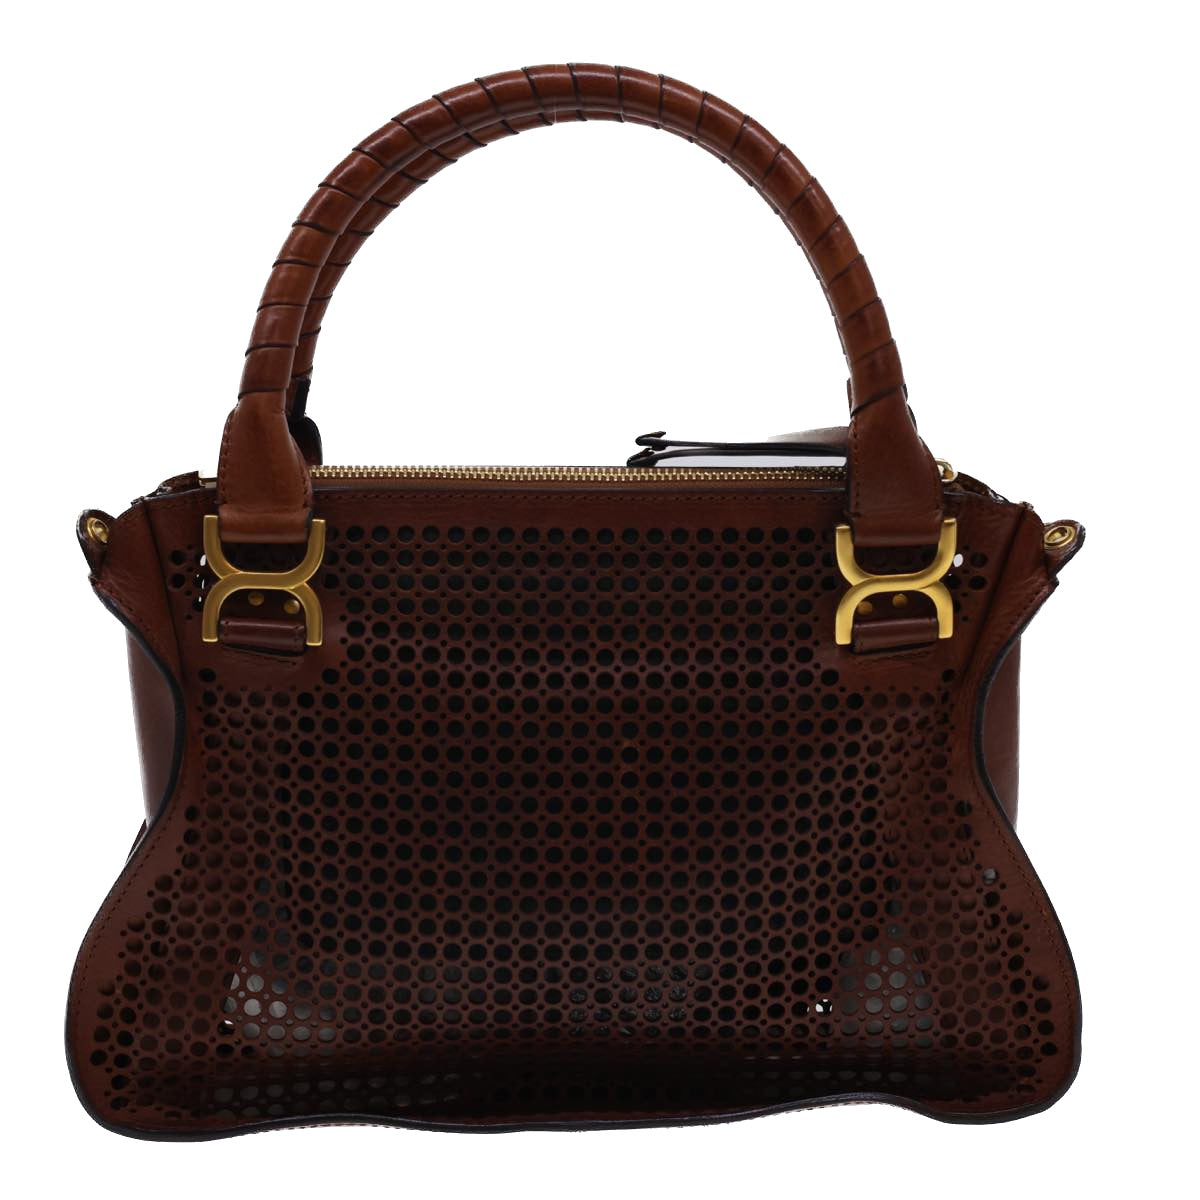 Chloe Punching Mercy Hand Bag Leather 2way Brown Auth am4269 - 0